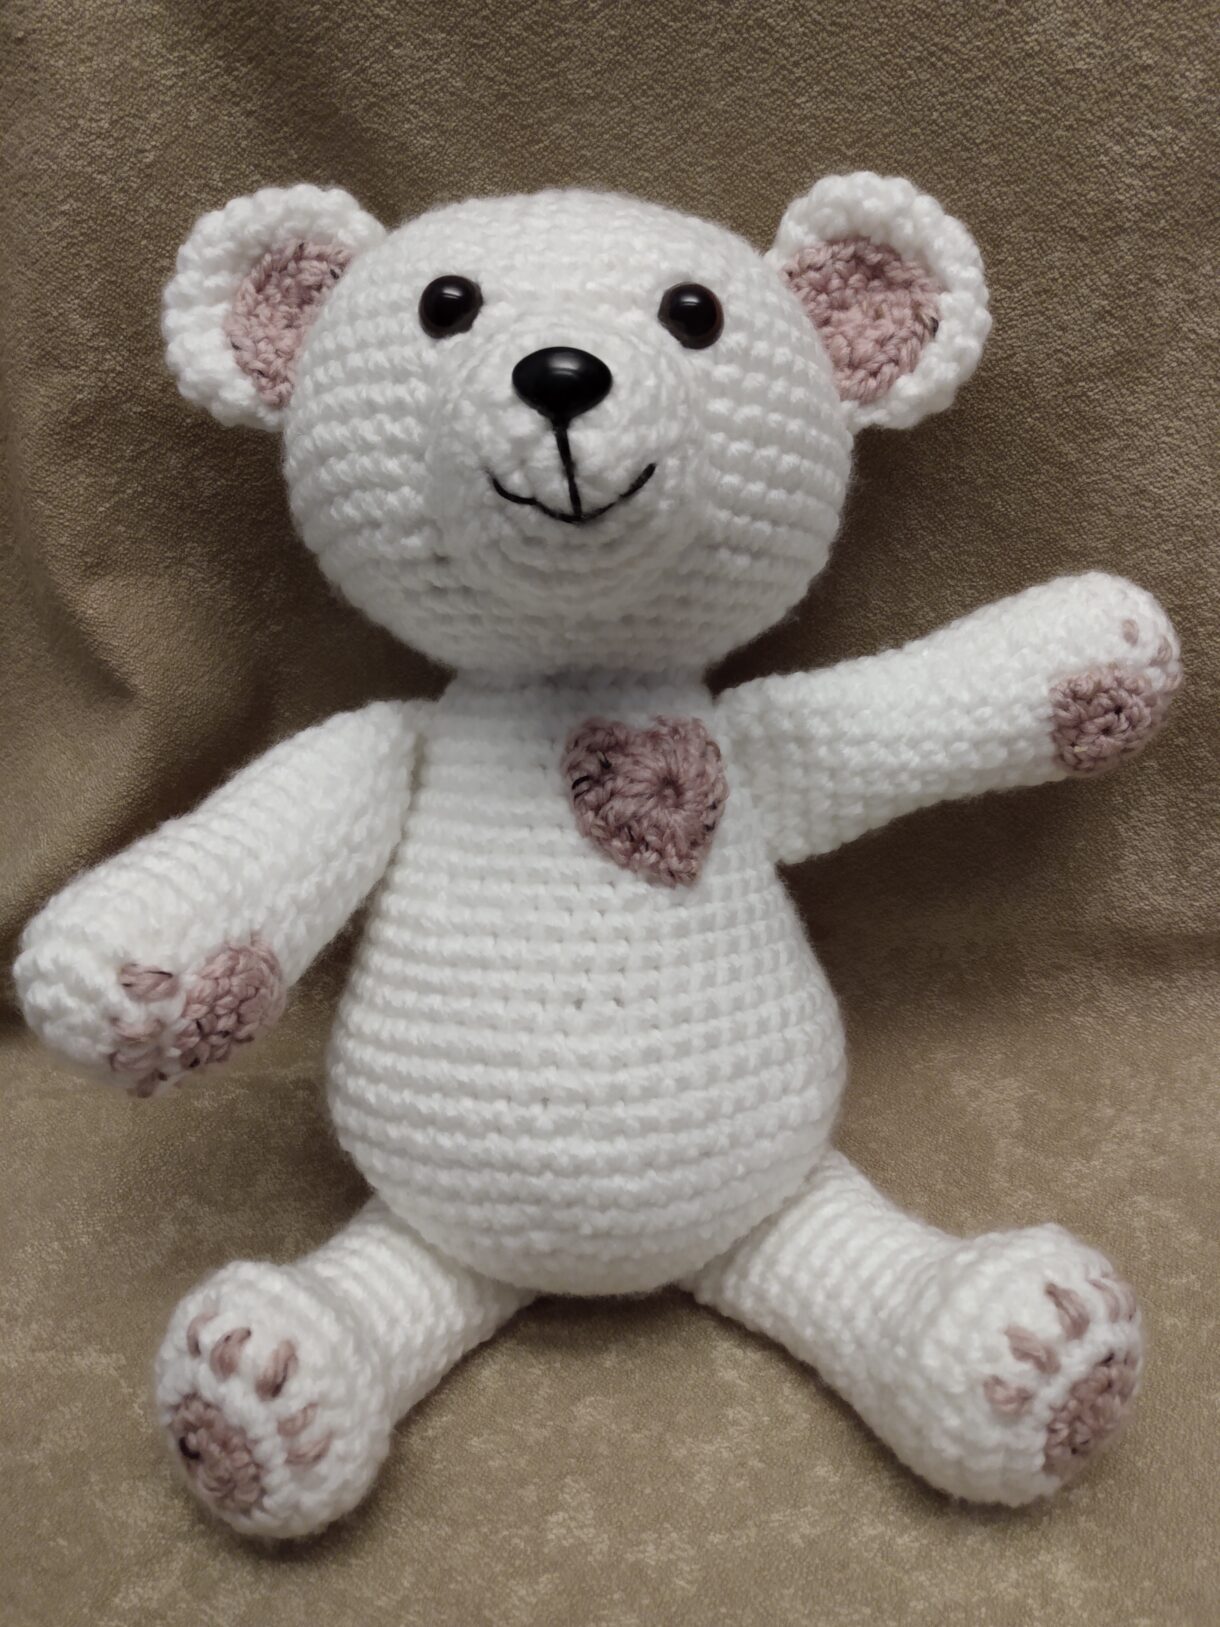 White and pink bear sitting arm outstretched